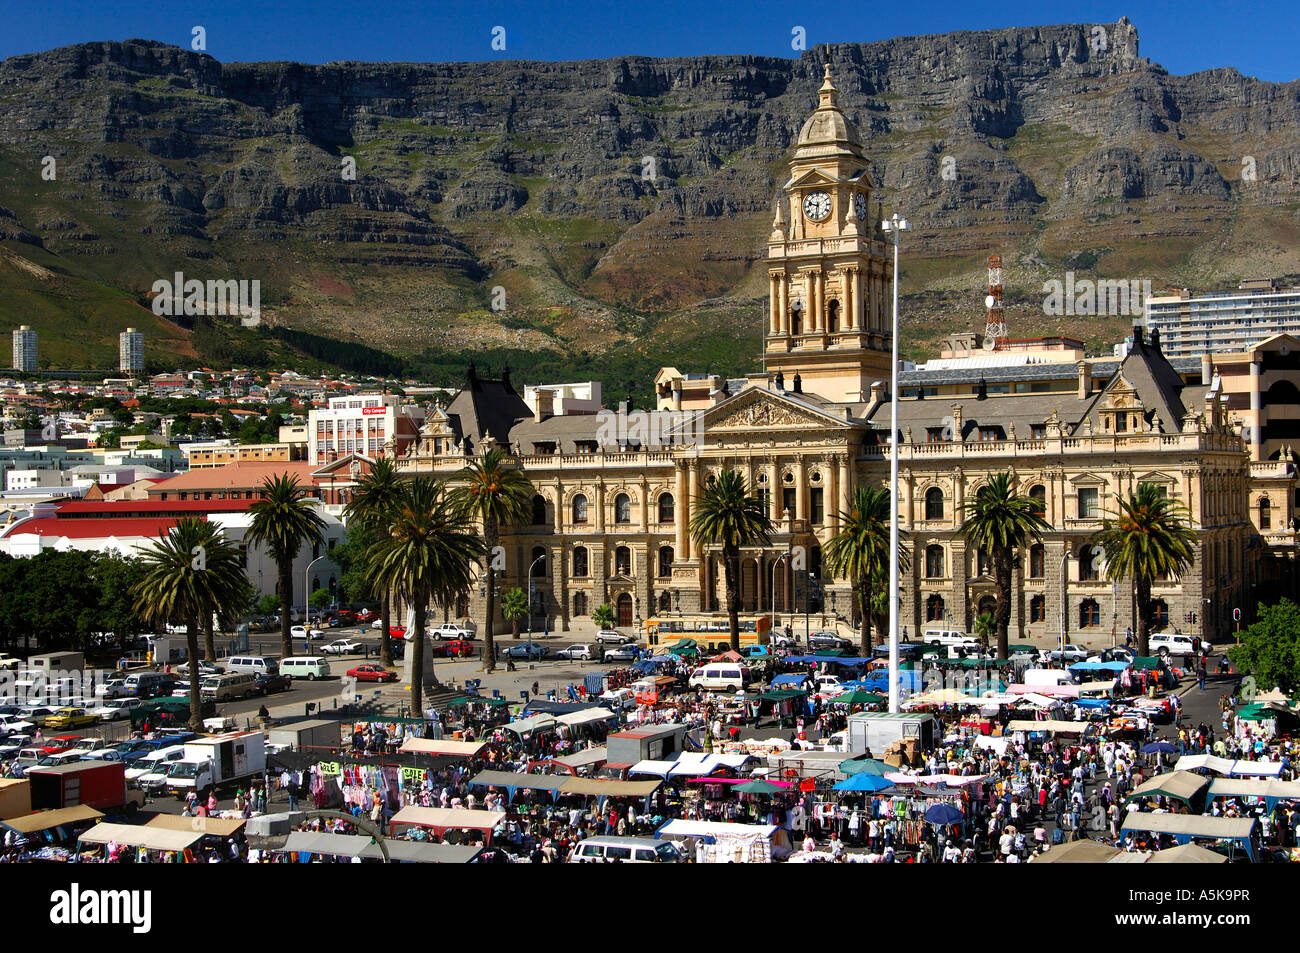 City hall, market day on Grand Parade square, Table Mountain, Cape Town, South Africa Stock Photo